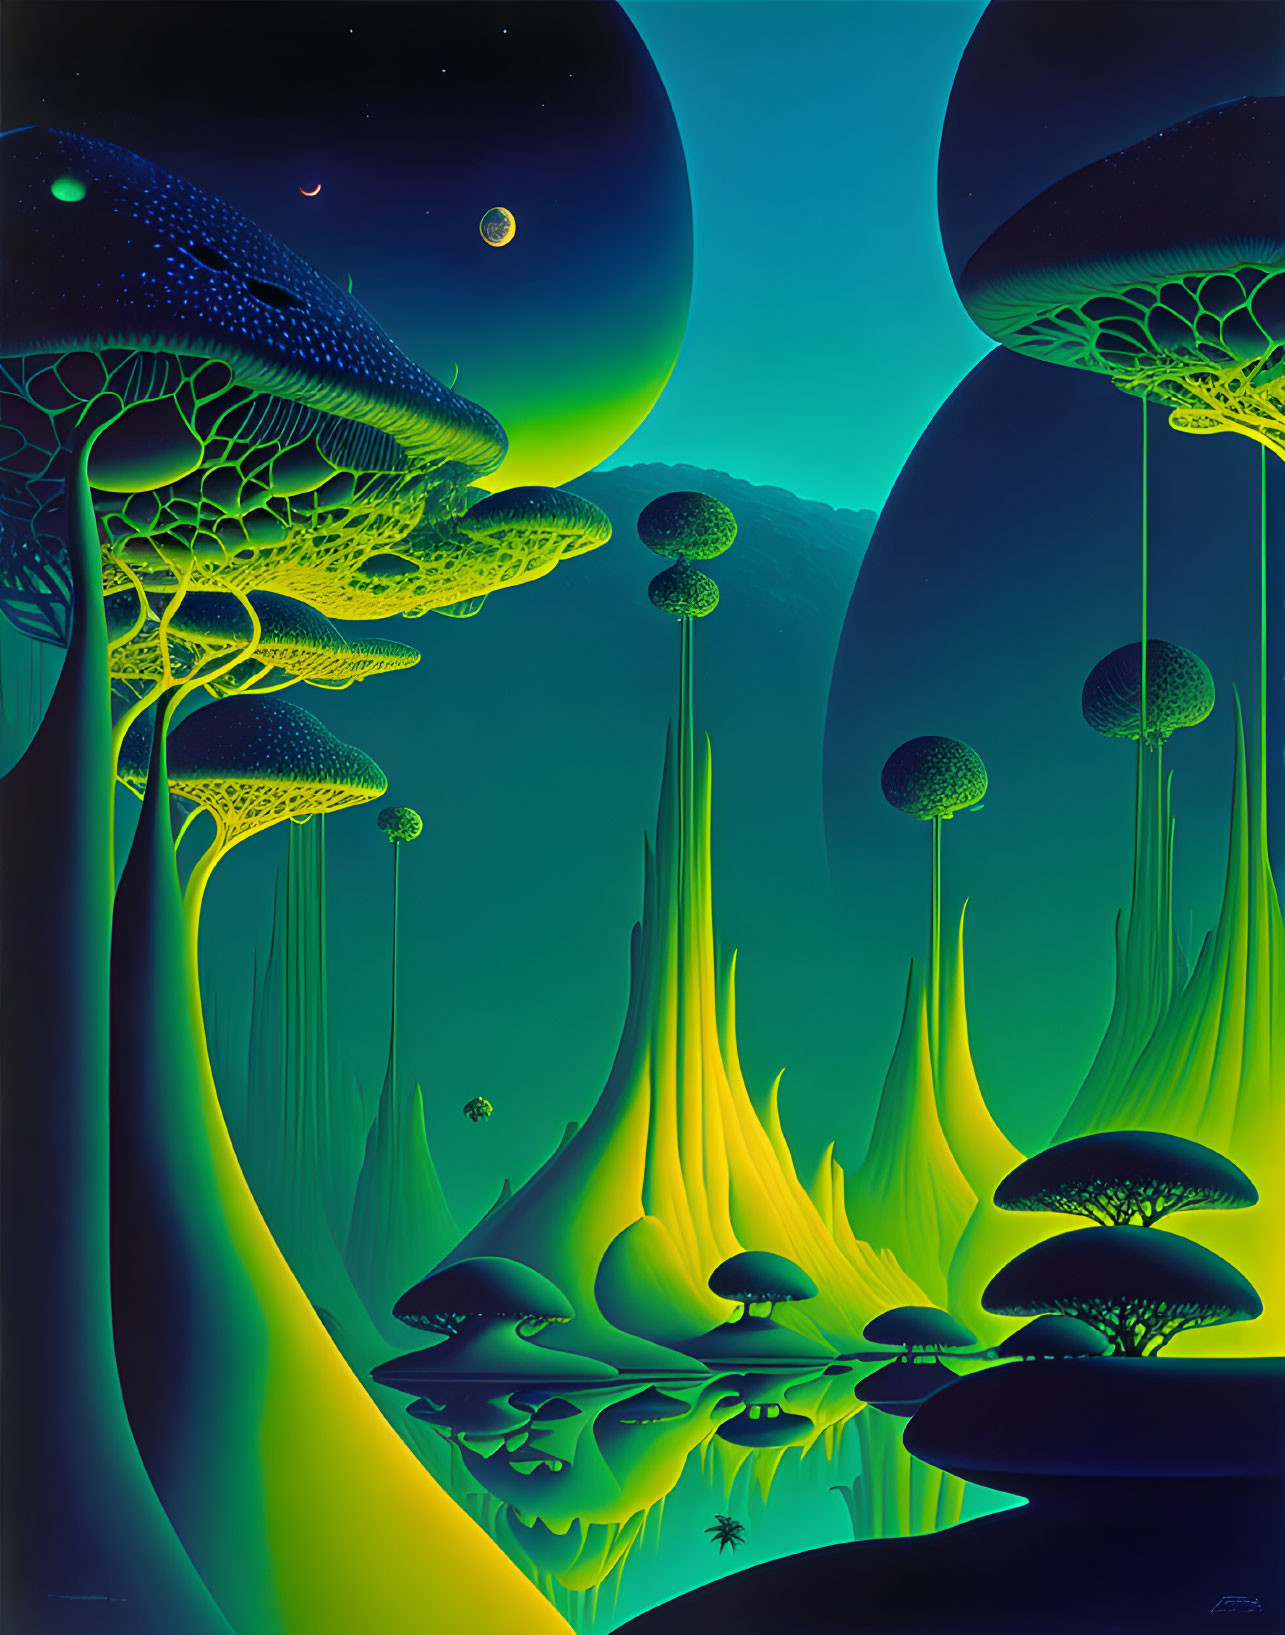 Surreal landscape with glowing bioluminescent mushroom structures